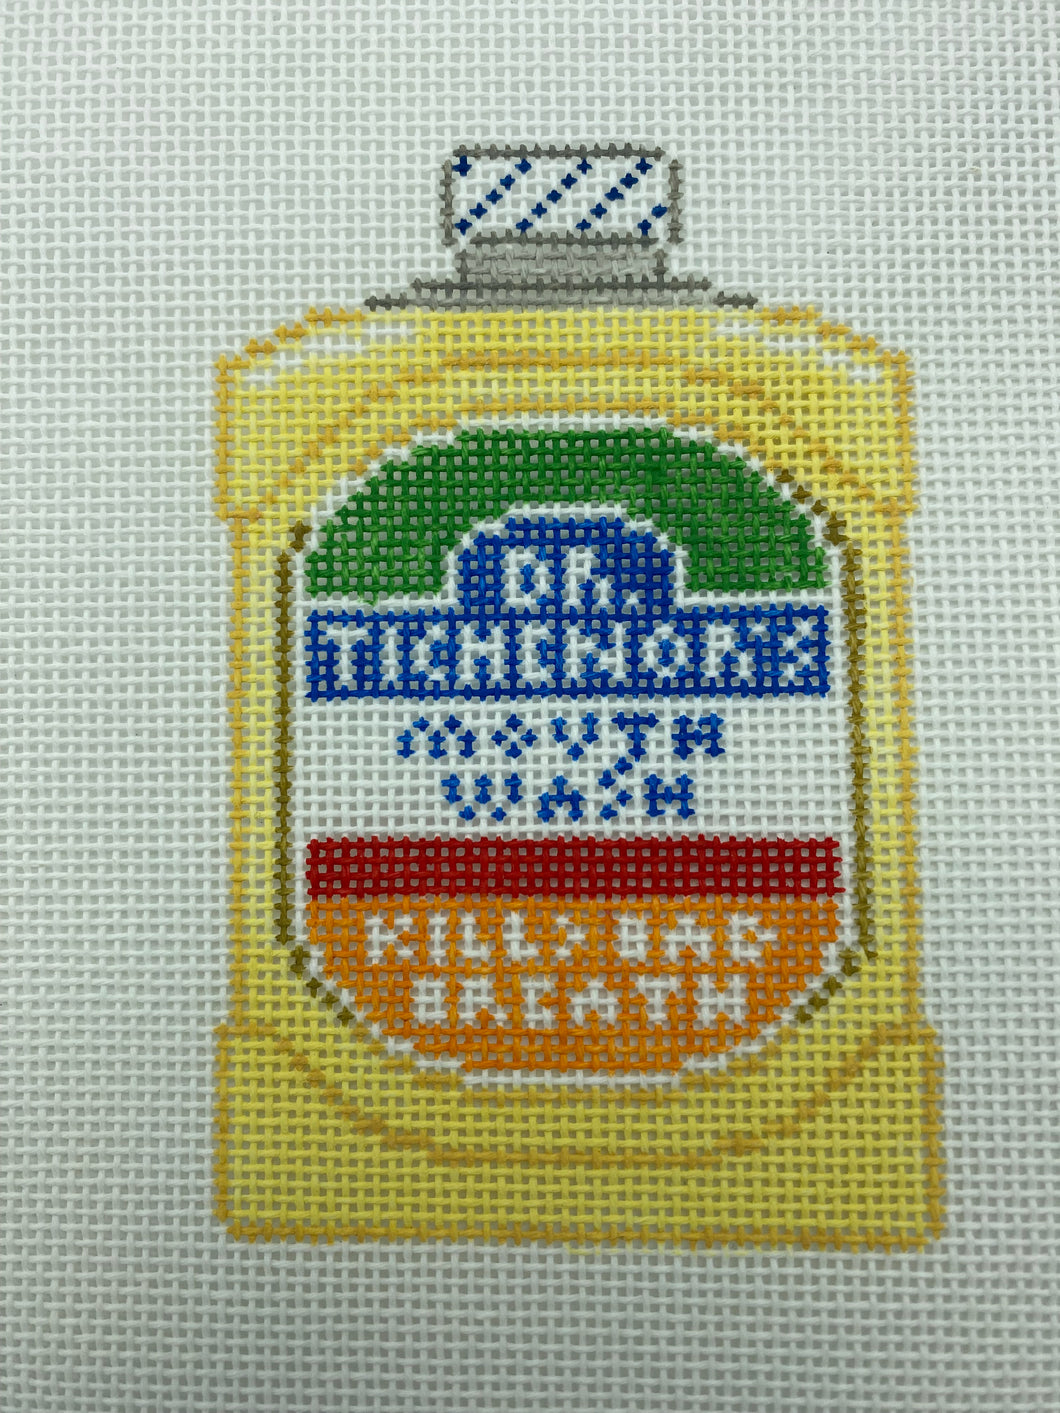 Dr. Tichenor's Needlepoint Ornament